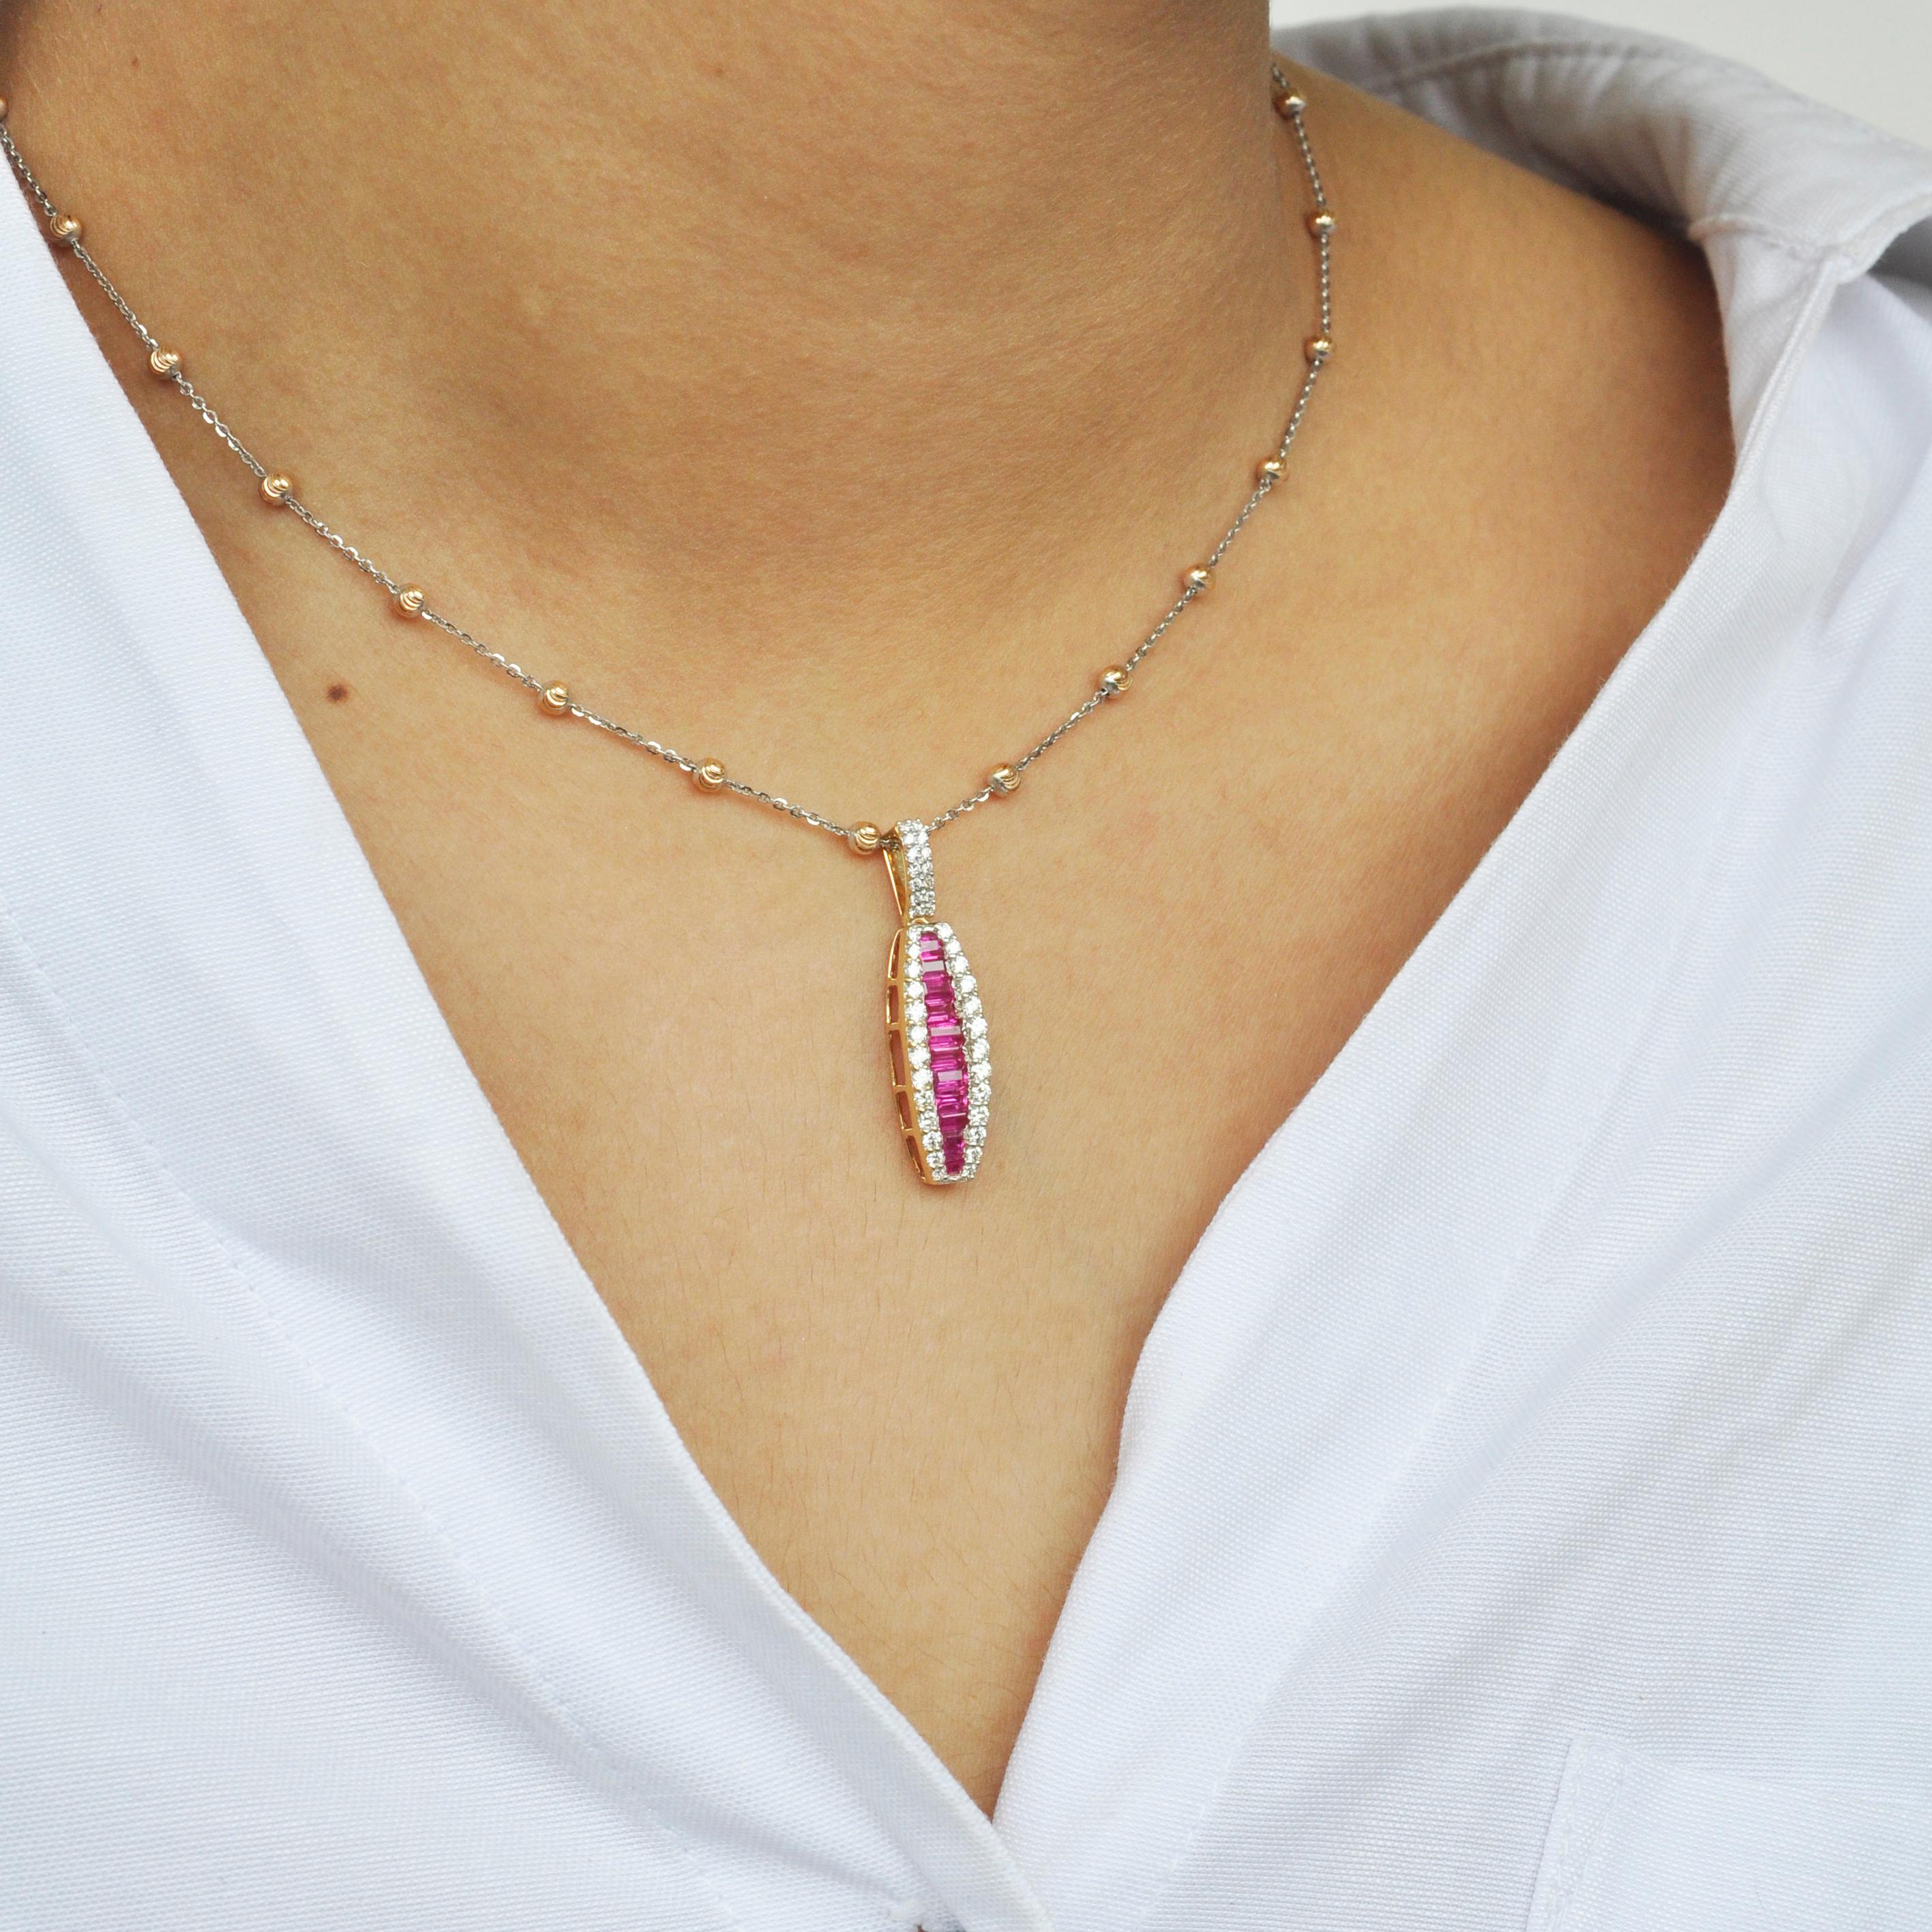 18 karat yellow gold channel set ruby baguette diamond linear pendant necklace.

The enchanting pendant with the pinkish red rubies incorporated within an equivalent layer of micro pave set diamonds on either is distinctive in its very form. The